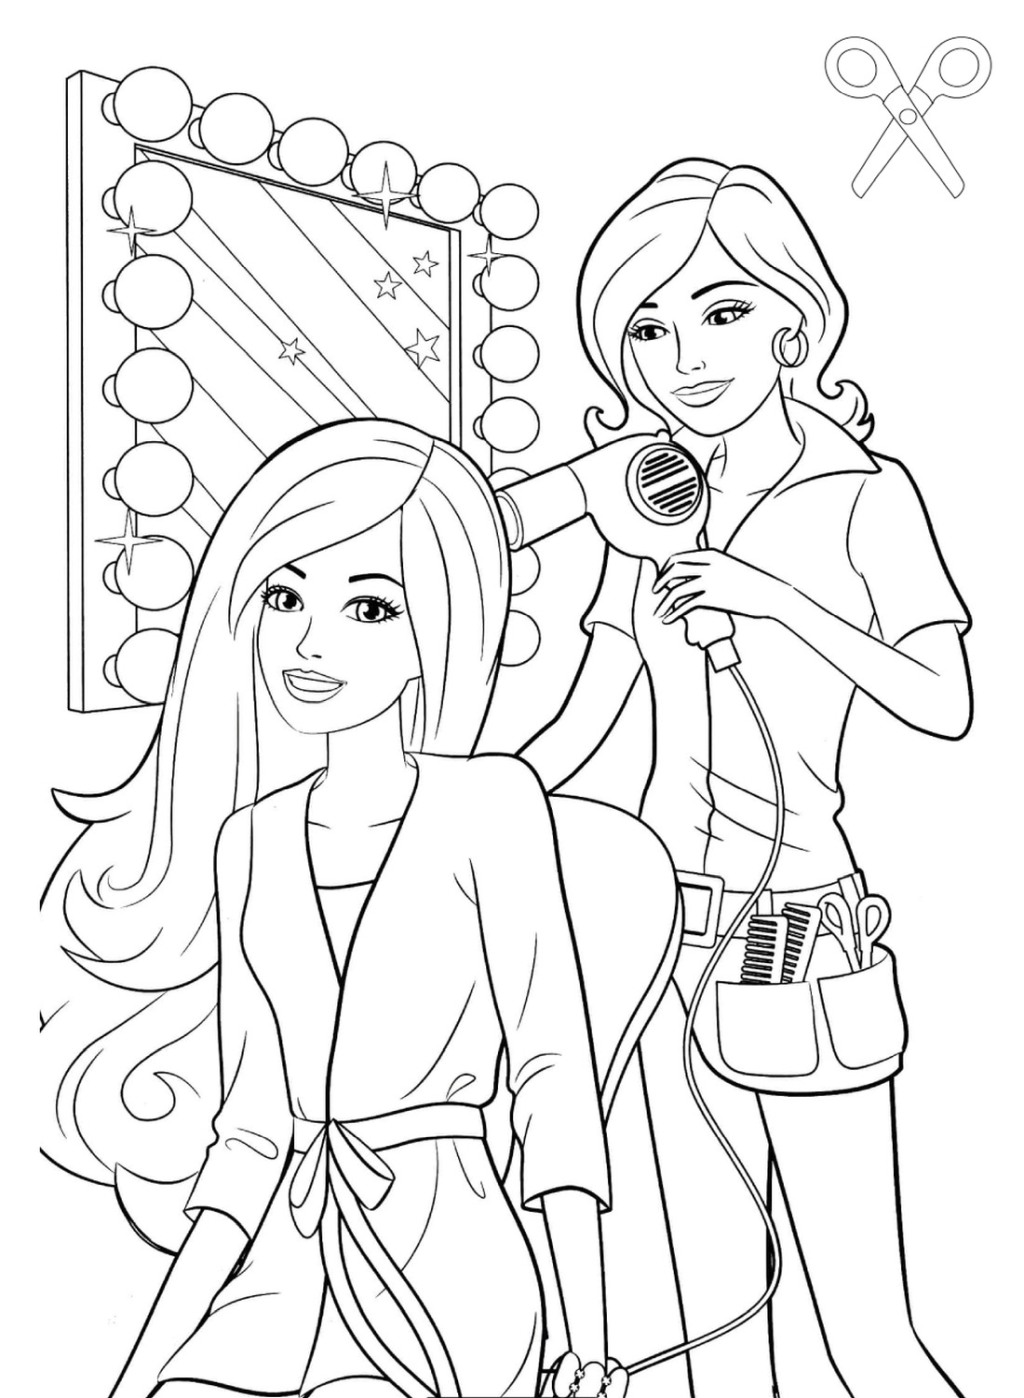 Hair saloon for coloring